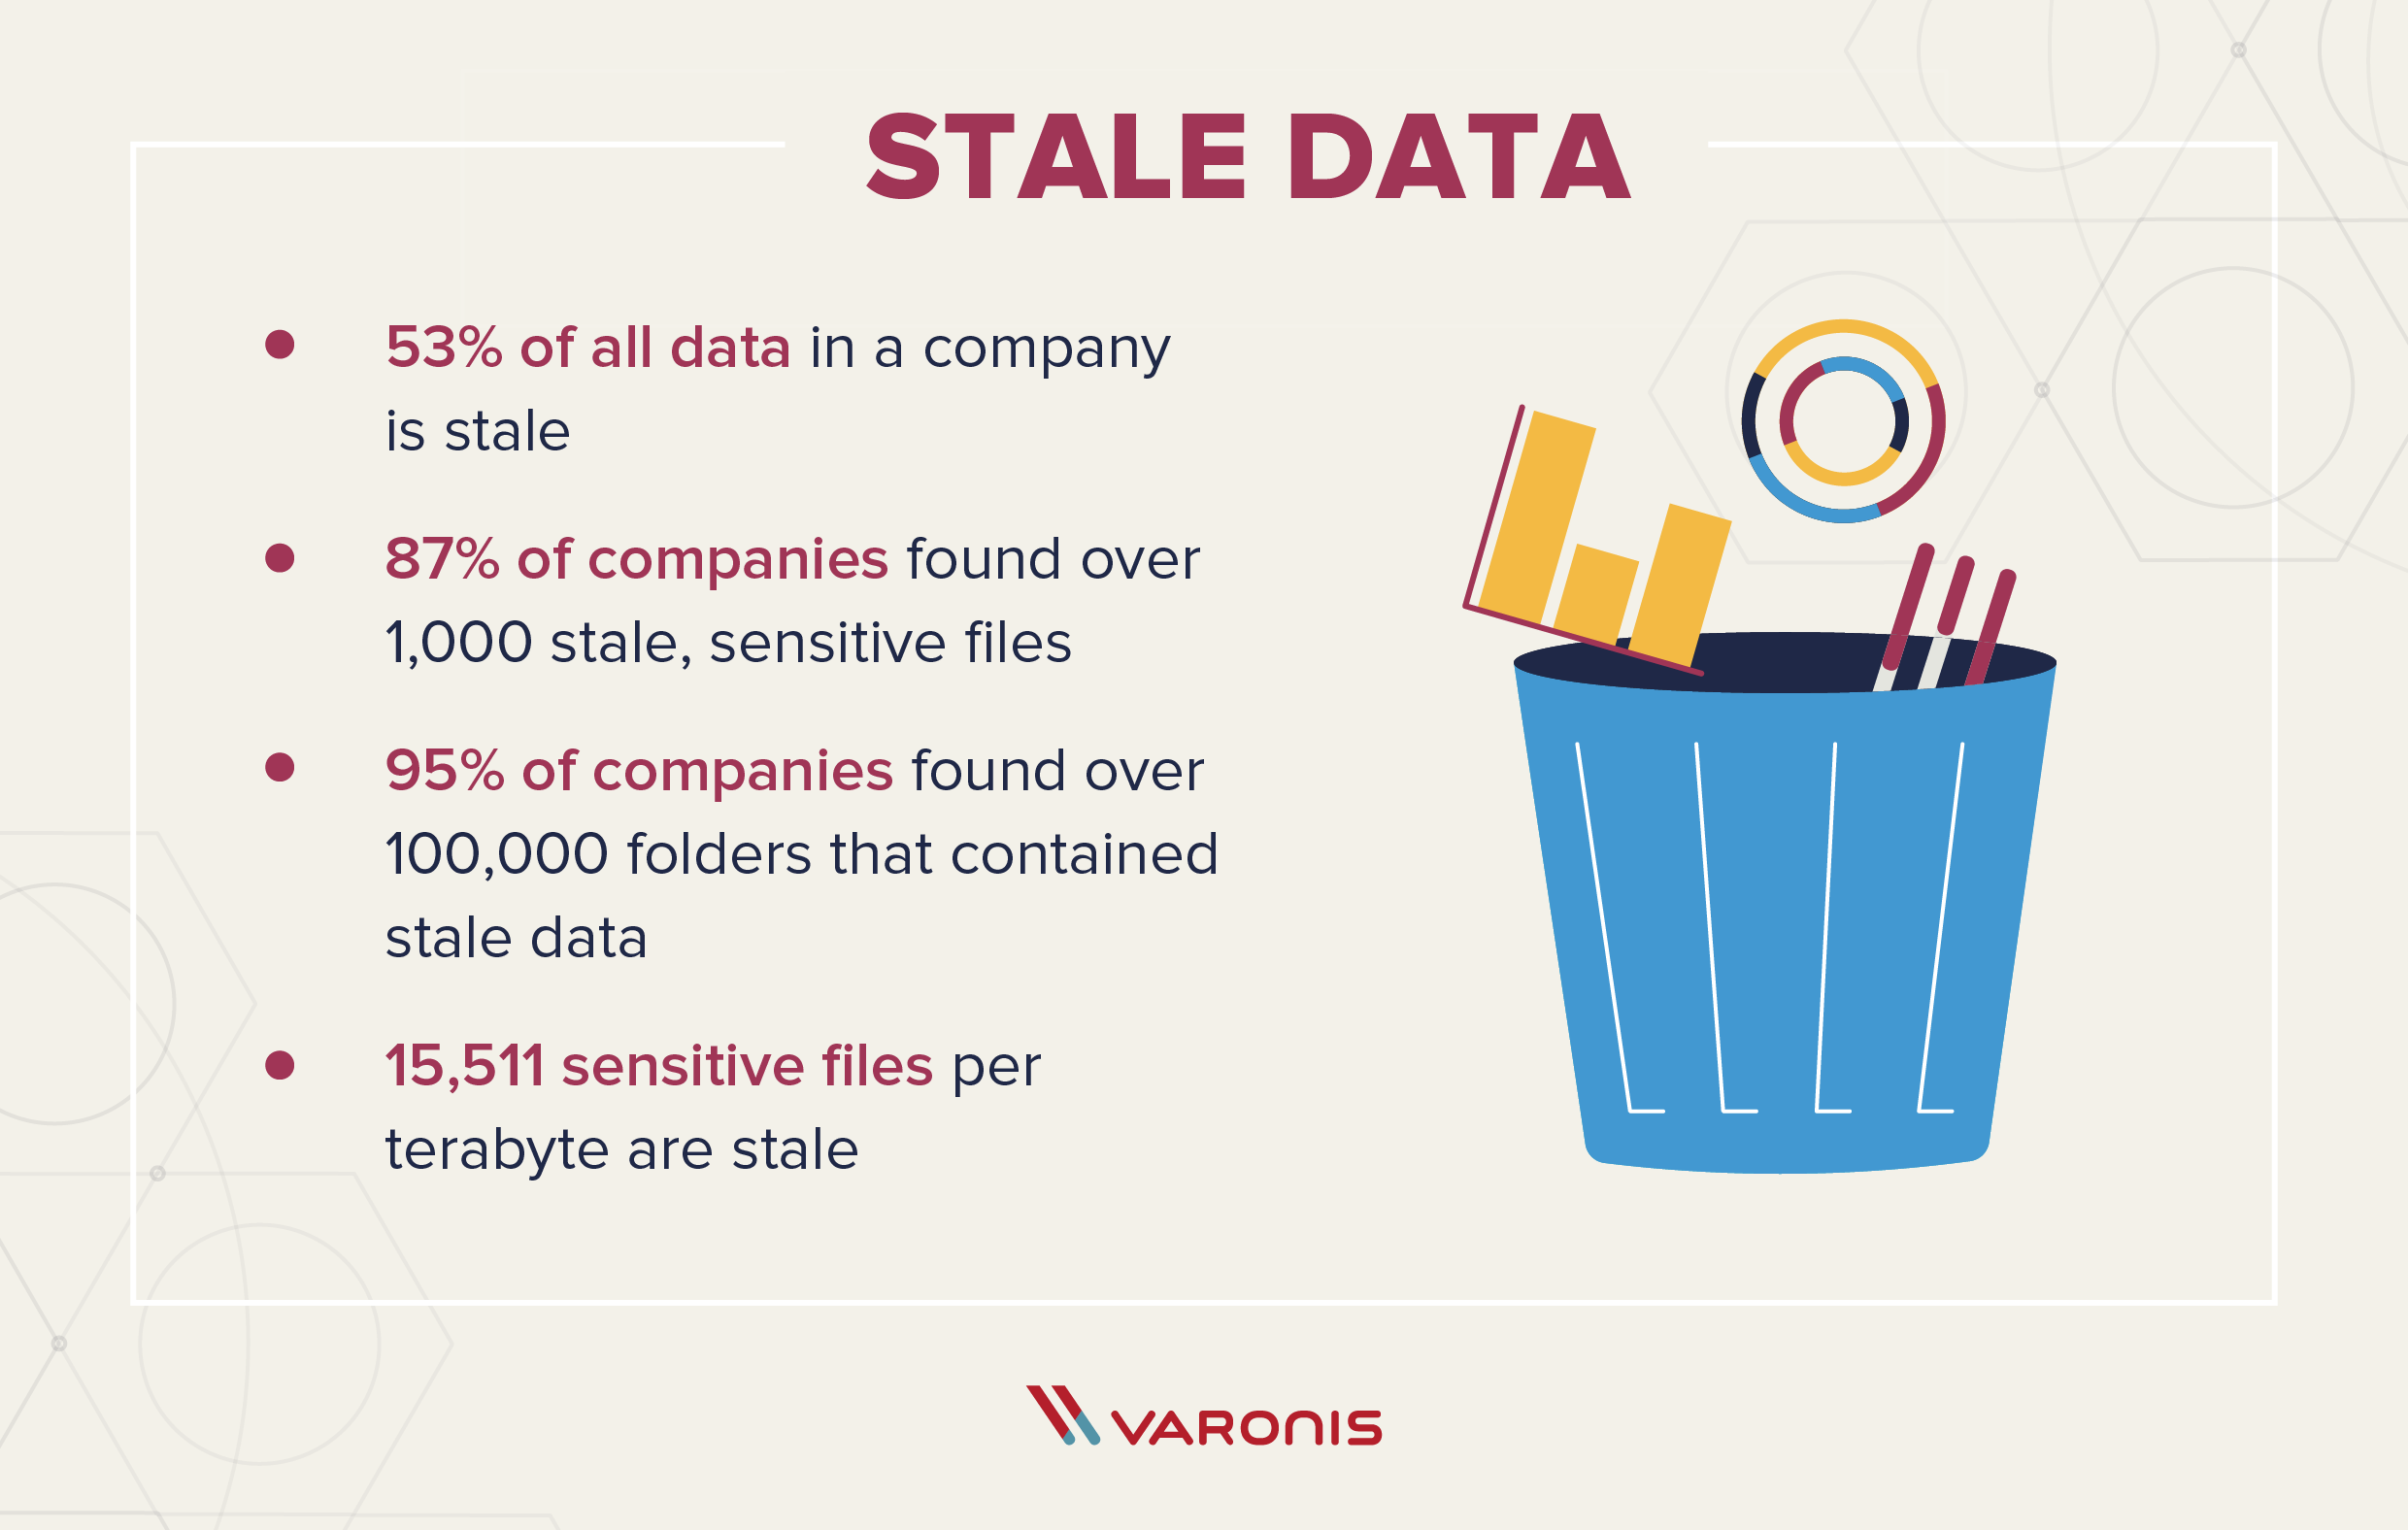 an illustration of a couple of different data security symbols with text that says: 53% of all data in a company is stale, 87% of companies found over 1,000 stale, sensitive files , 95% of companies found over 100,000 folders that contained stale data, 15,511 sensitive files per terabyte are stale.